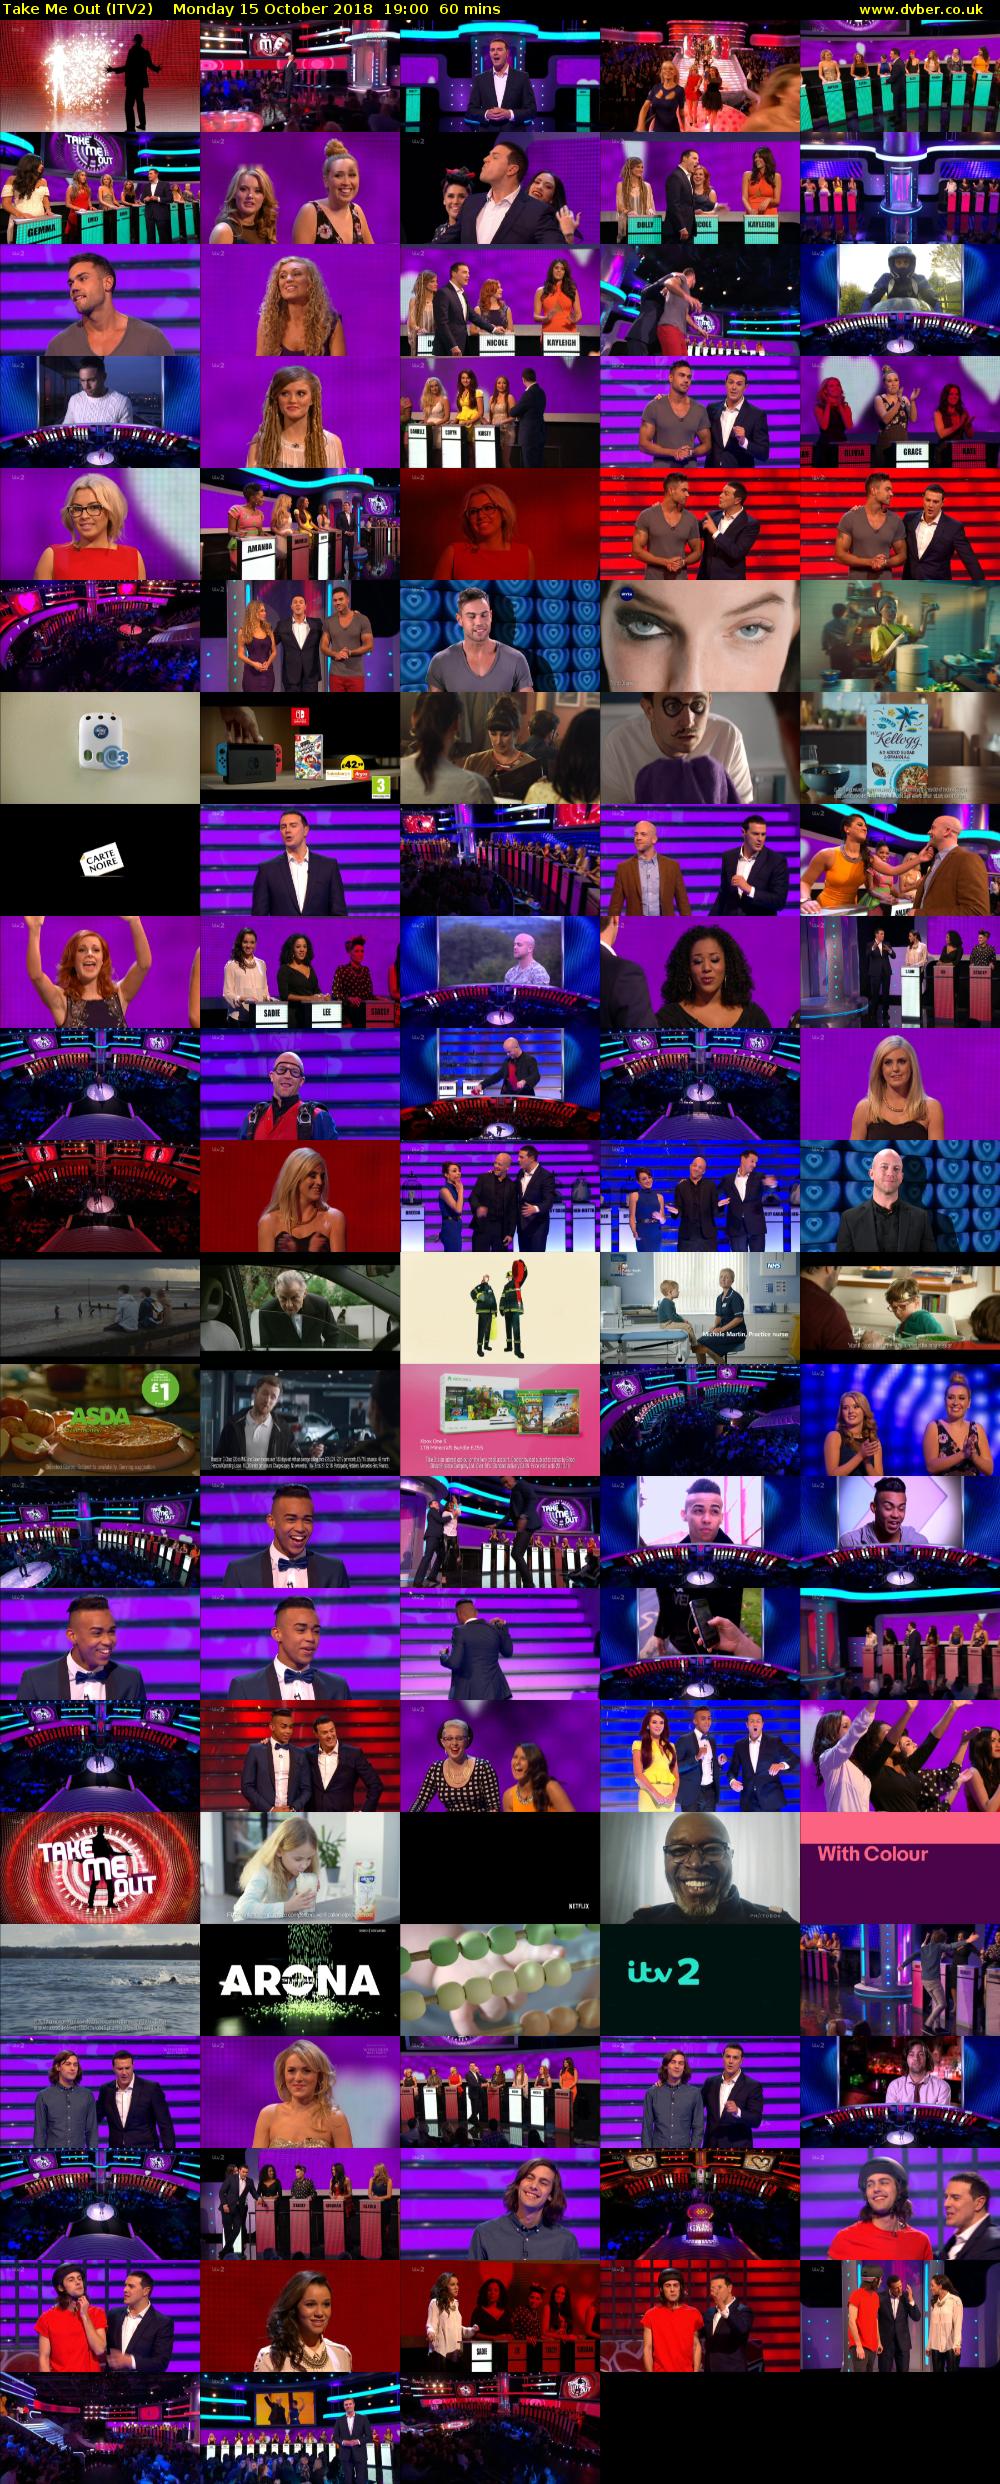 Take Me Out (ITV2) Monday 15 October 2018 19:00 - 20:00